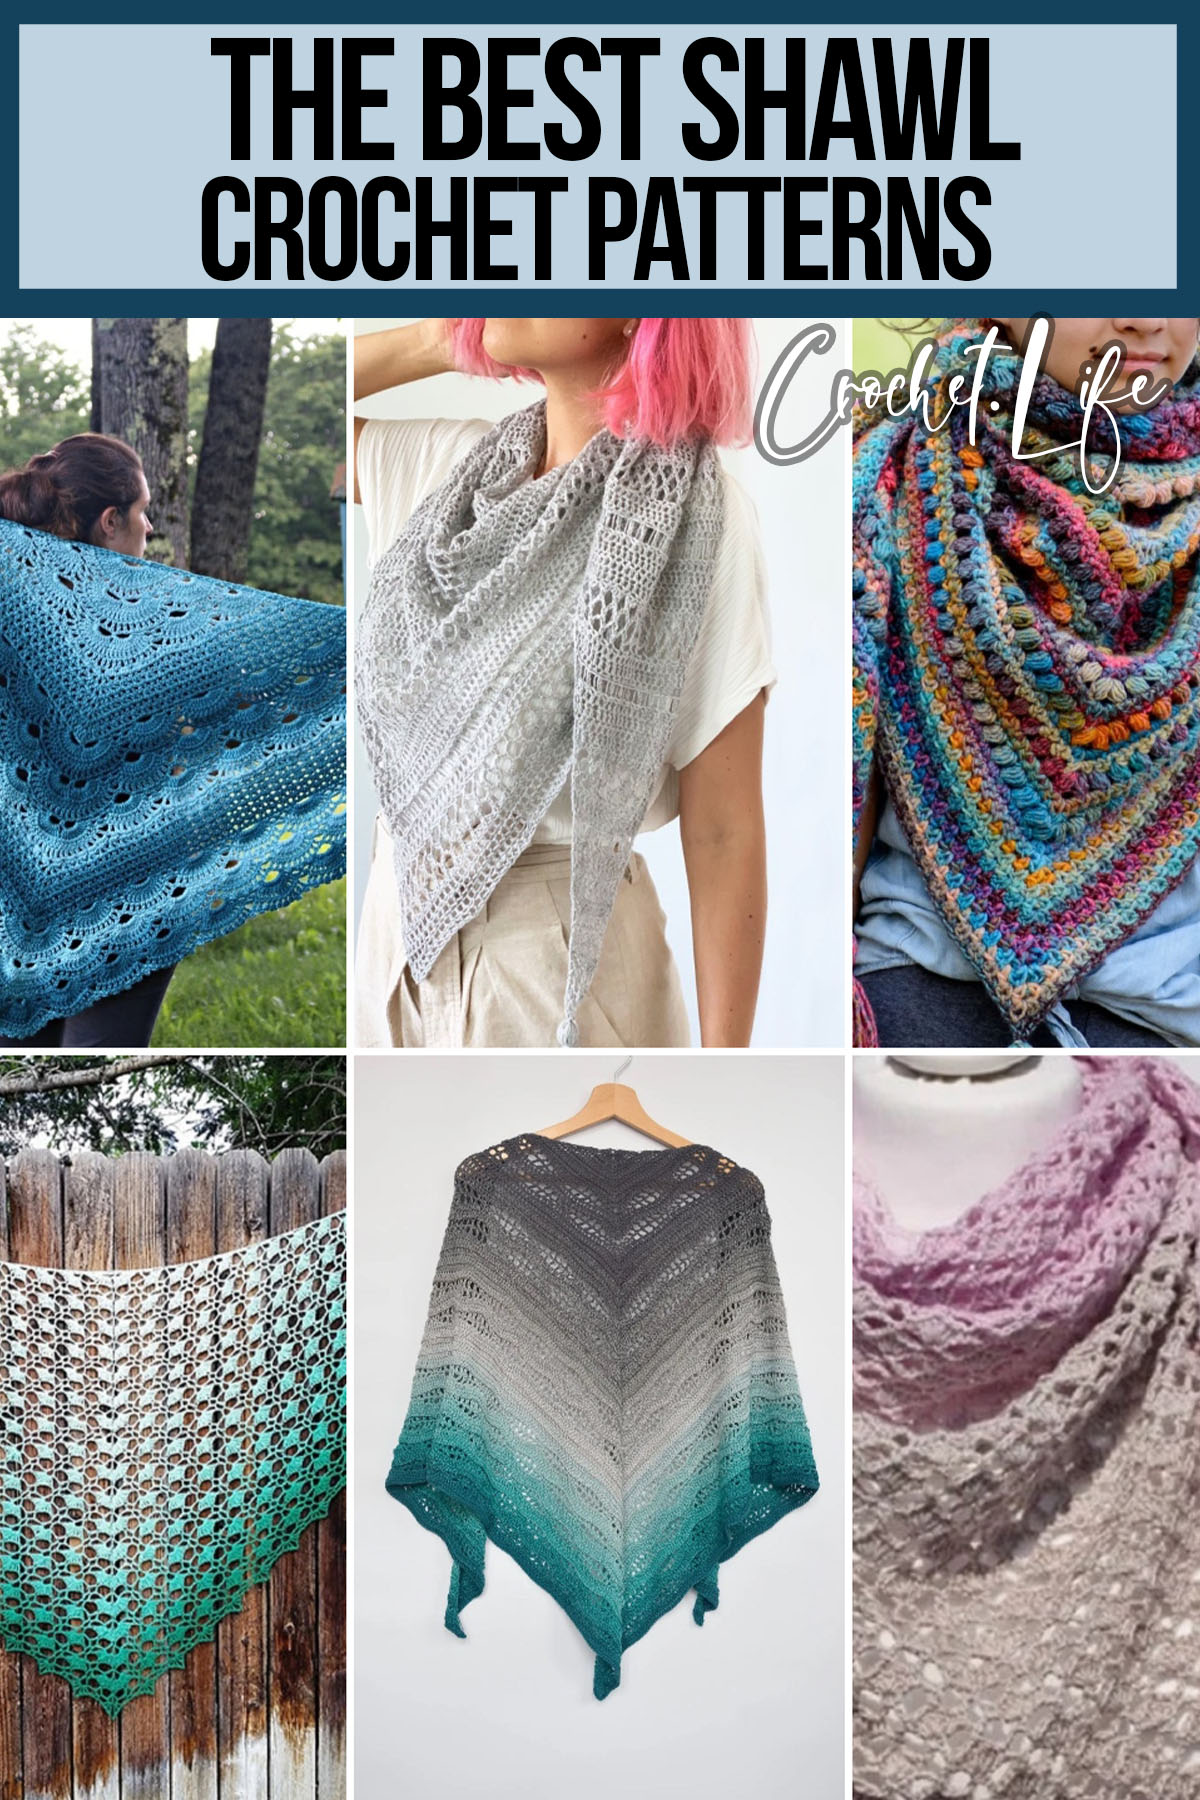 photo collage of patterns for crocheted shawls with text which reads the best shawl crochet patterns